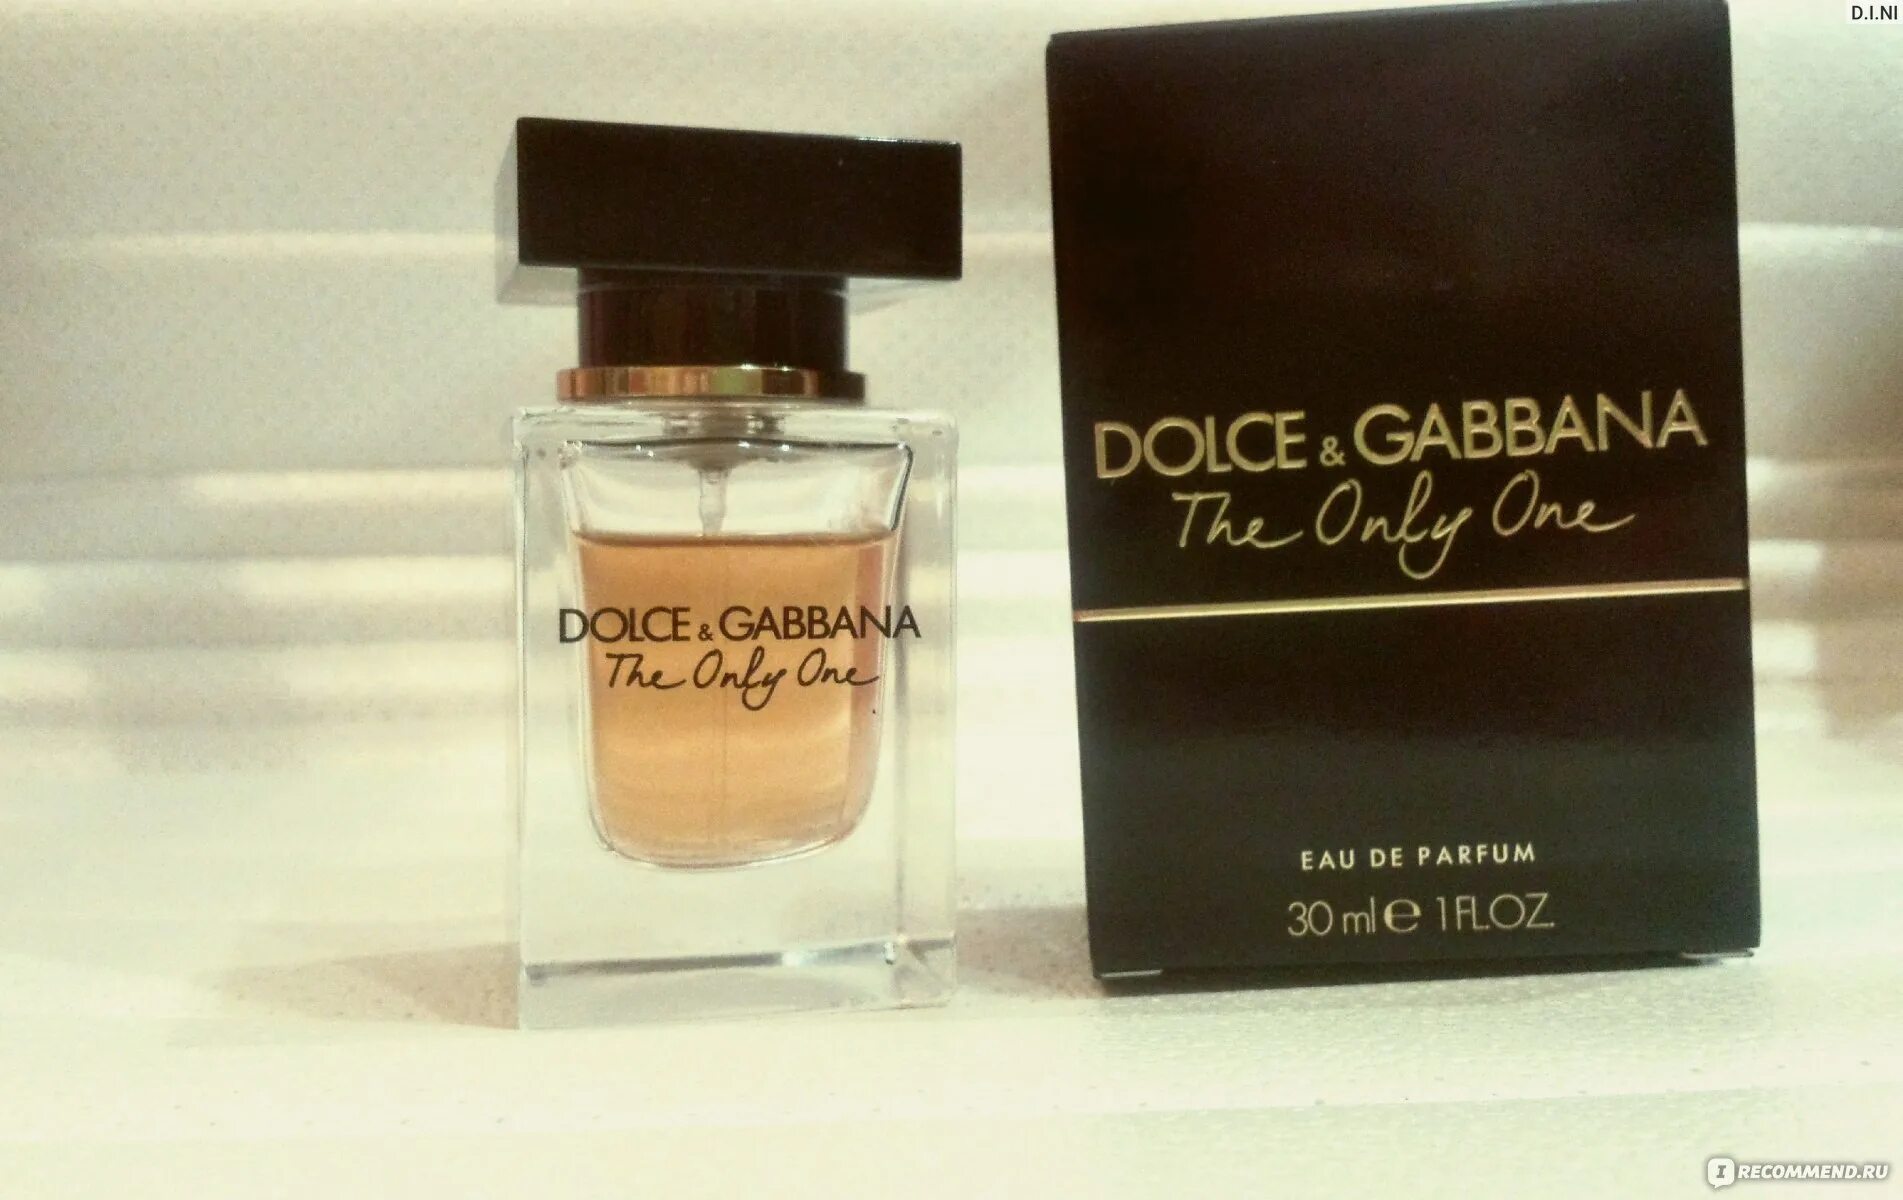 D&G the only one Дольче Габбана. Духи Дольче Габбана the only one. Dolce Gabbana the only one женские 10 мл. Духи Дольче Габбана зе Онли Ван. Gabbana the only one женские